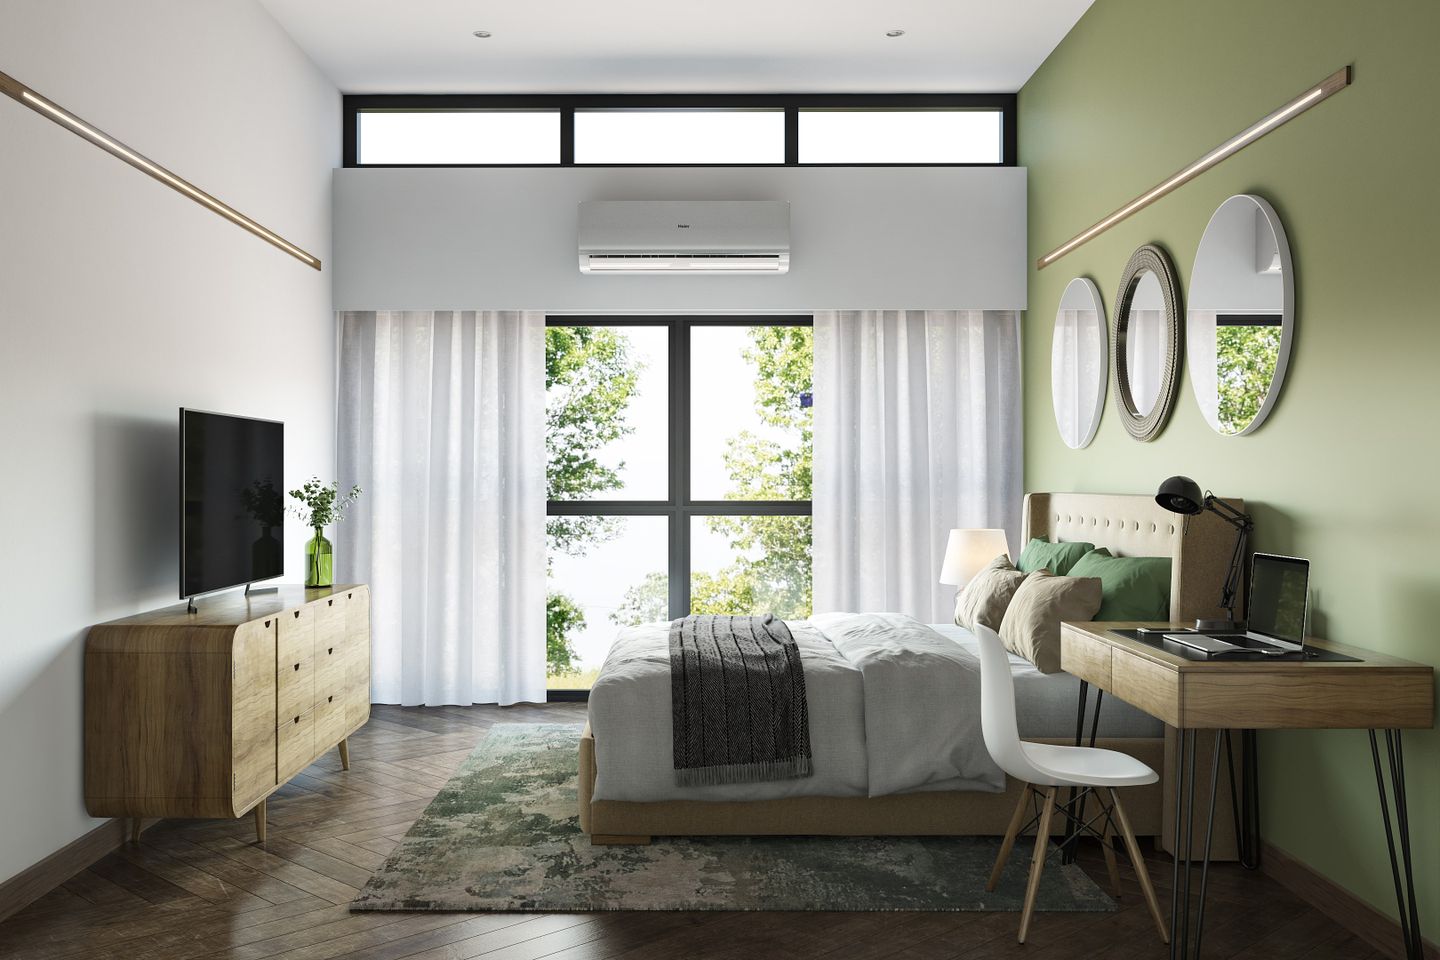 Mid-Century Modern Bedroom Design With Green Accent Wall And Study Table